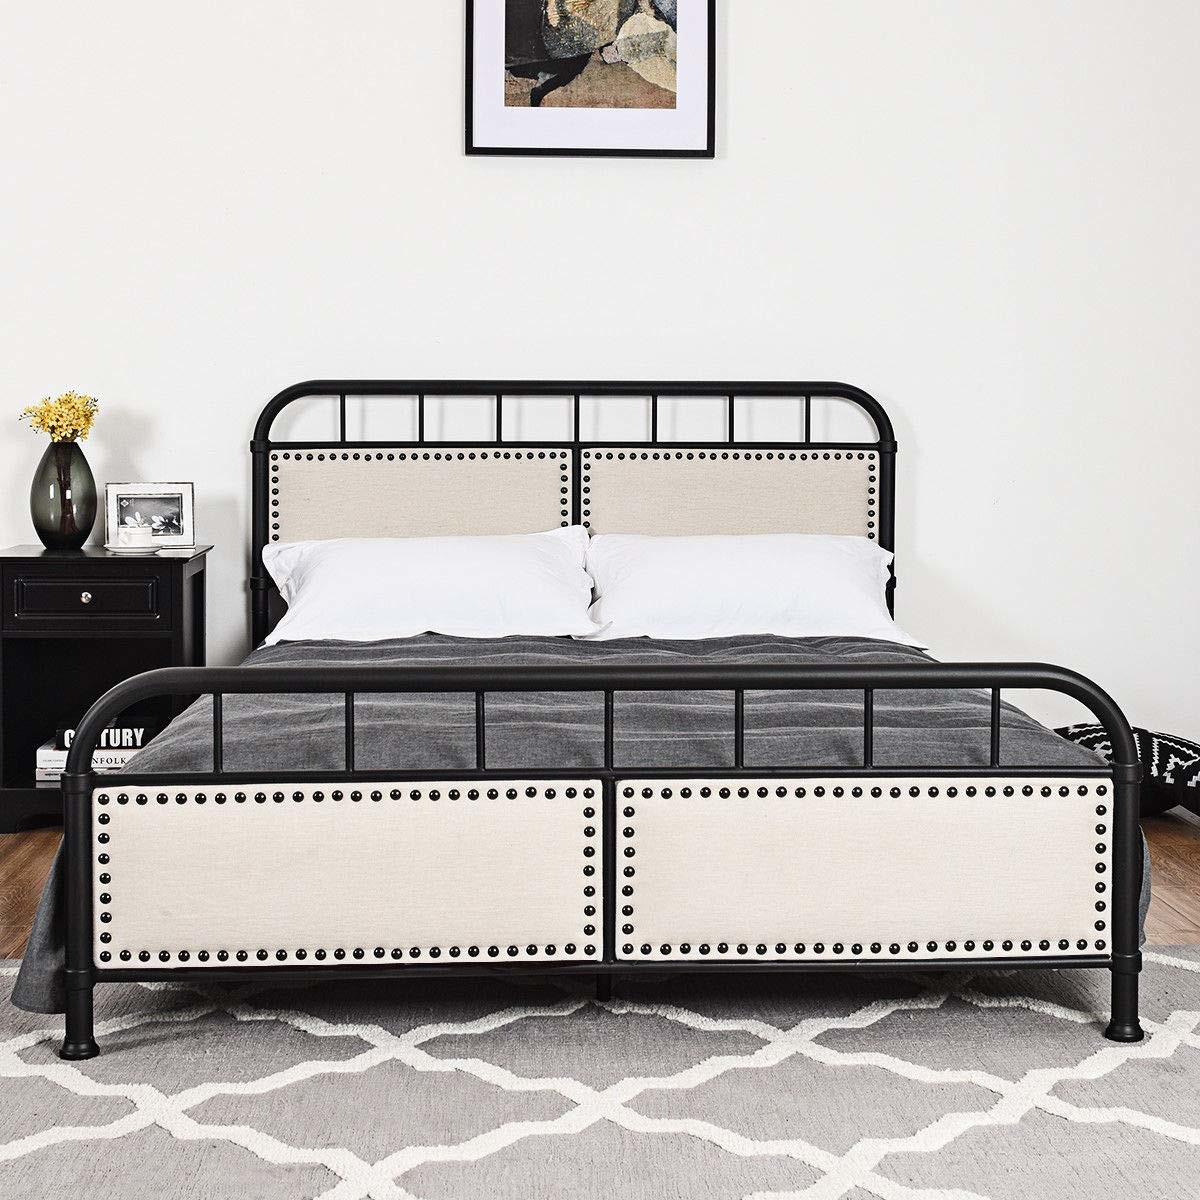 Rust Proof King Size Iron Bed Long Lasting Durability Smooth Finish Edges